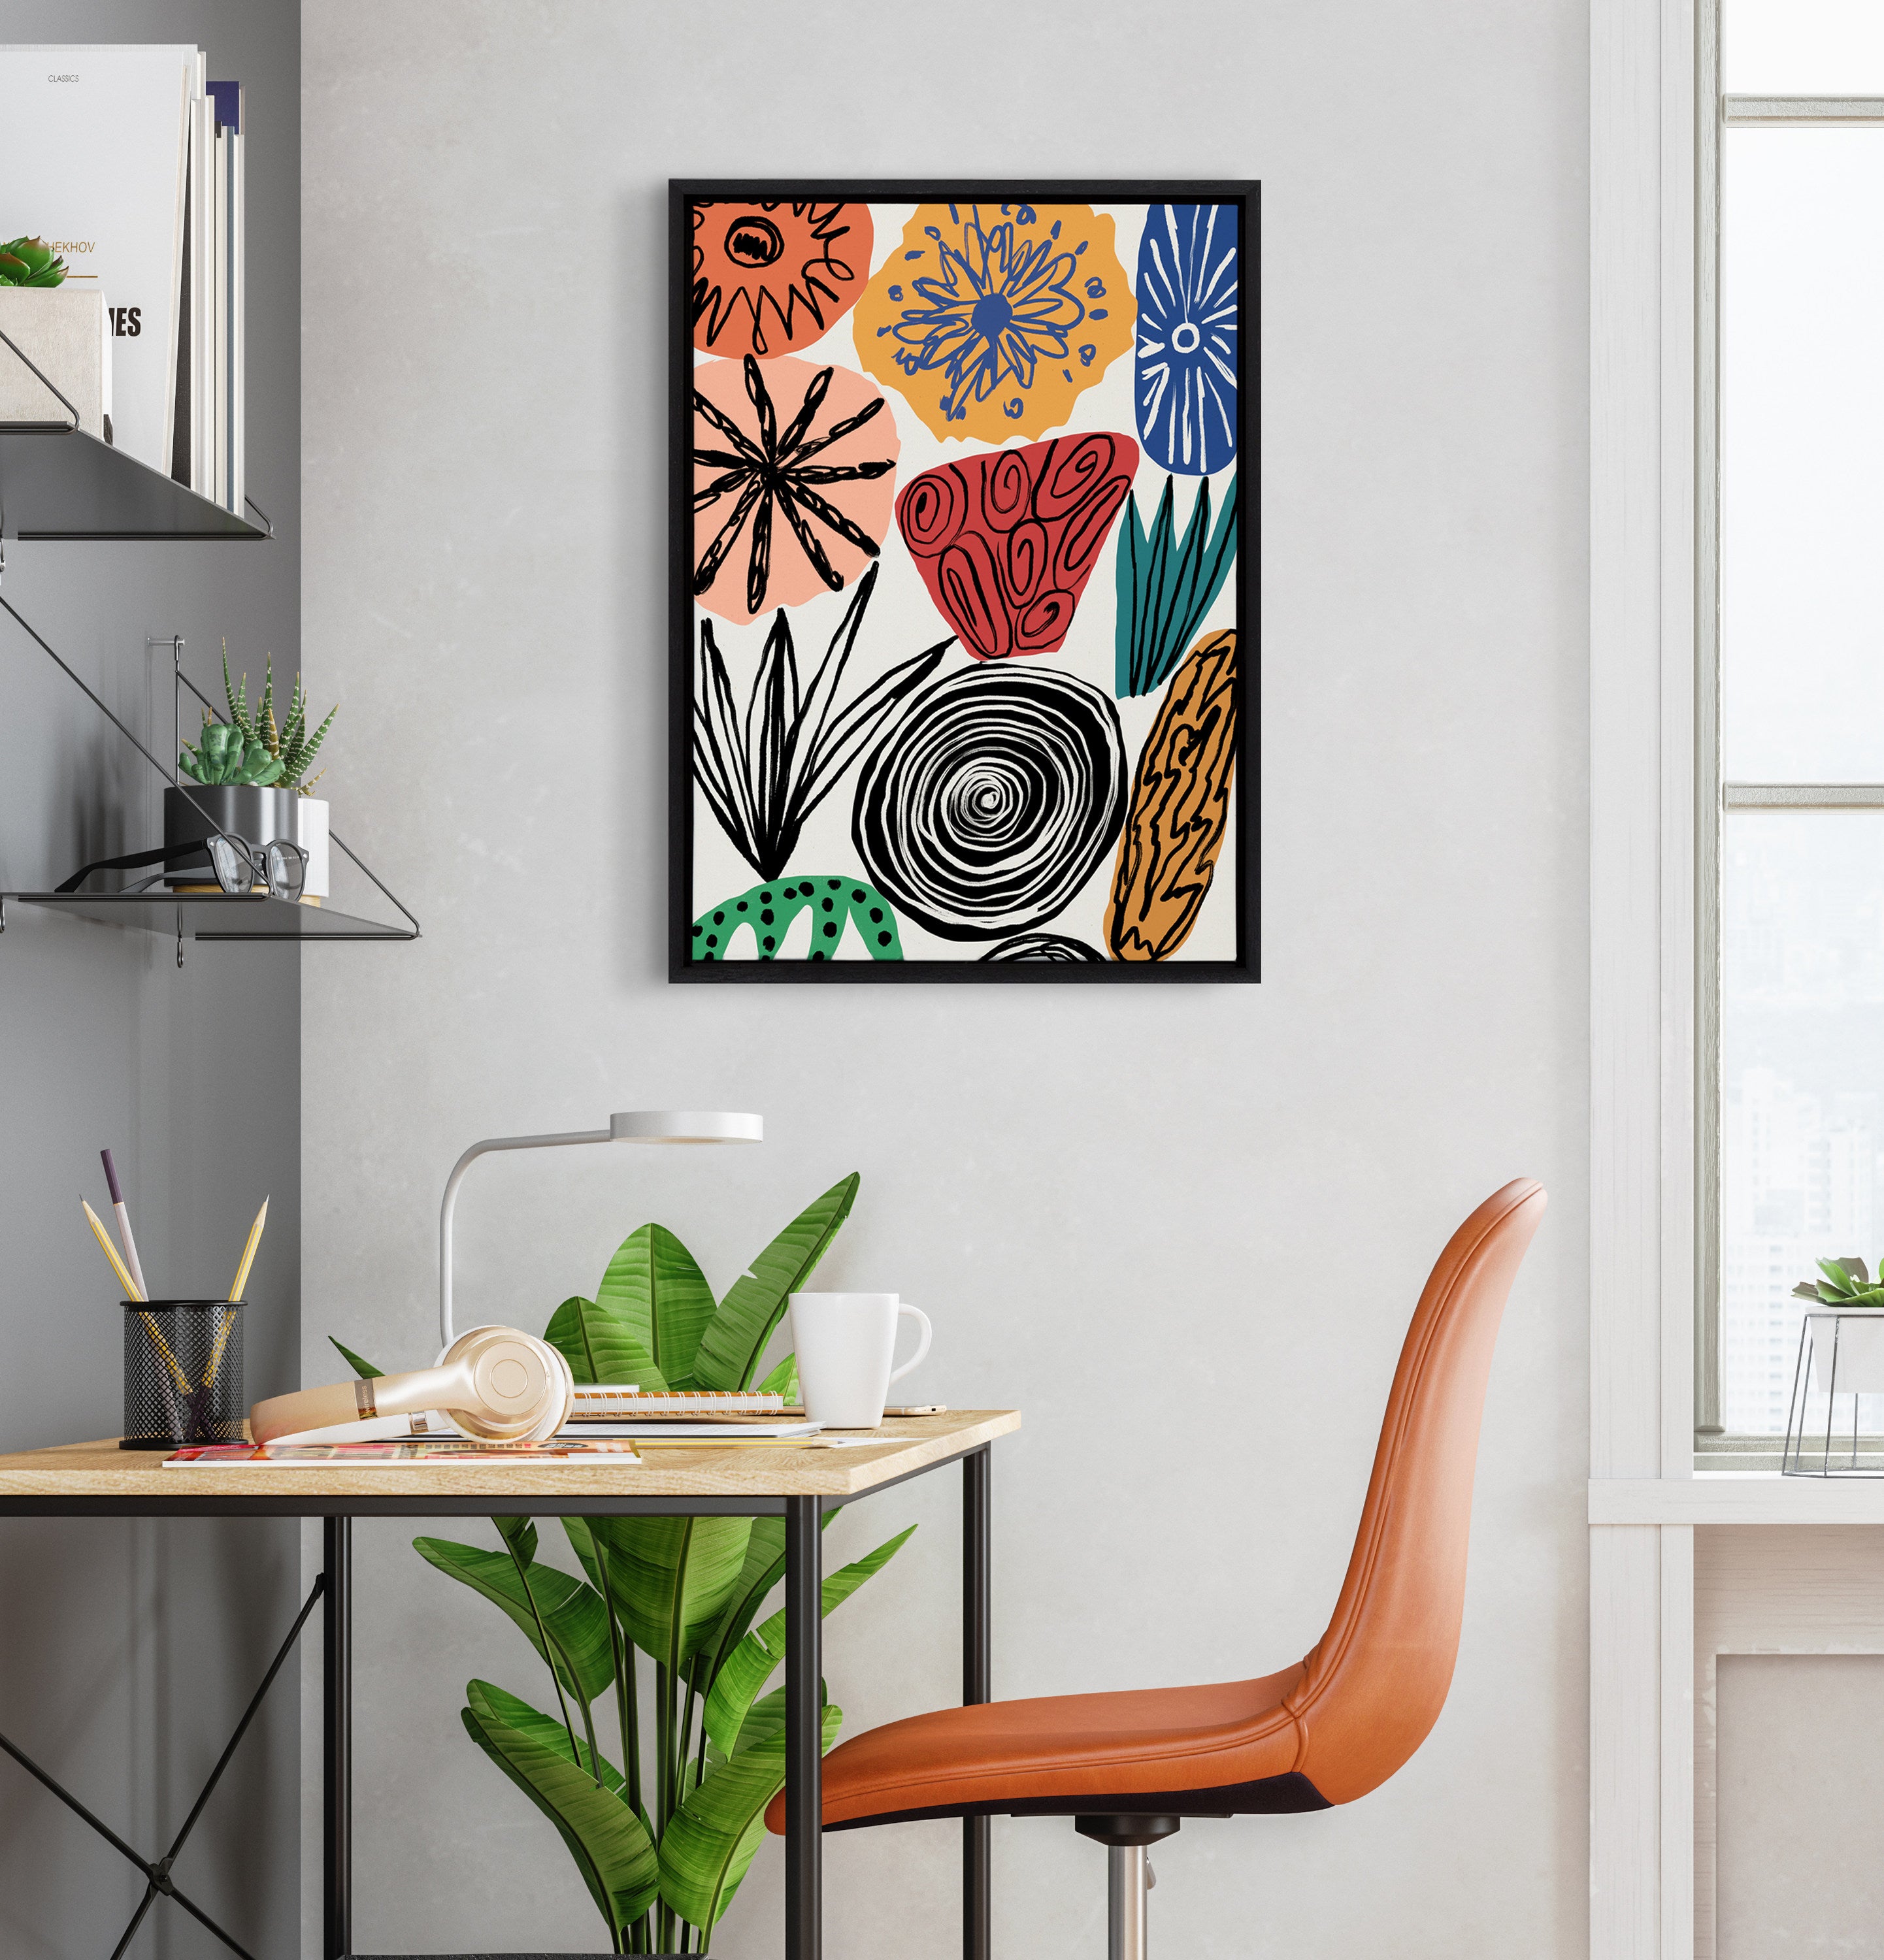 Sylvie Abstract Floral 2 Framed Canvas by Marcello Velho